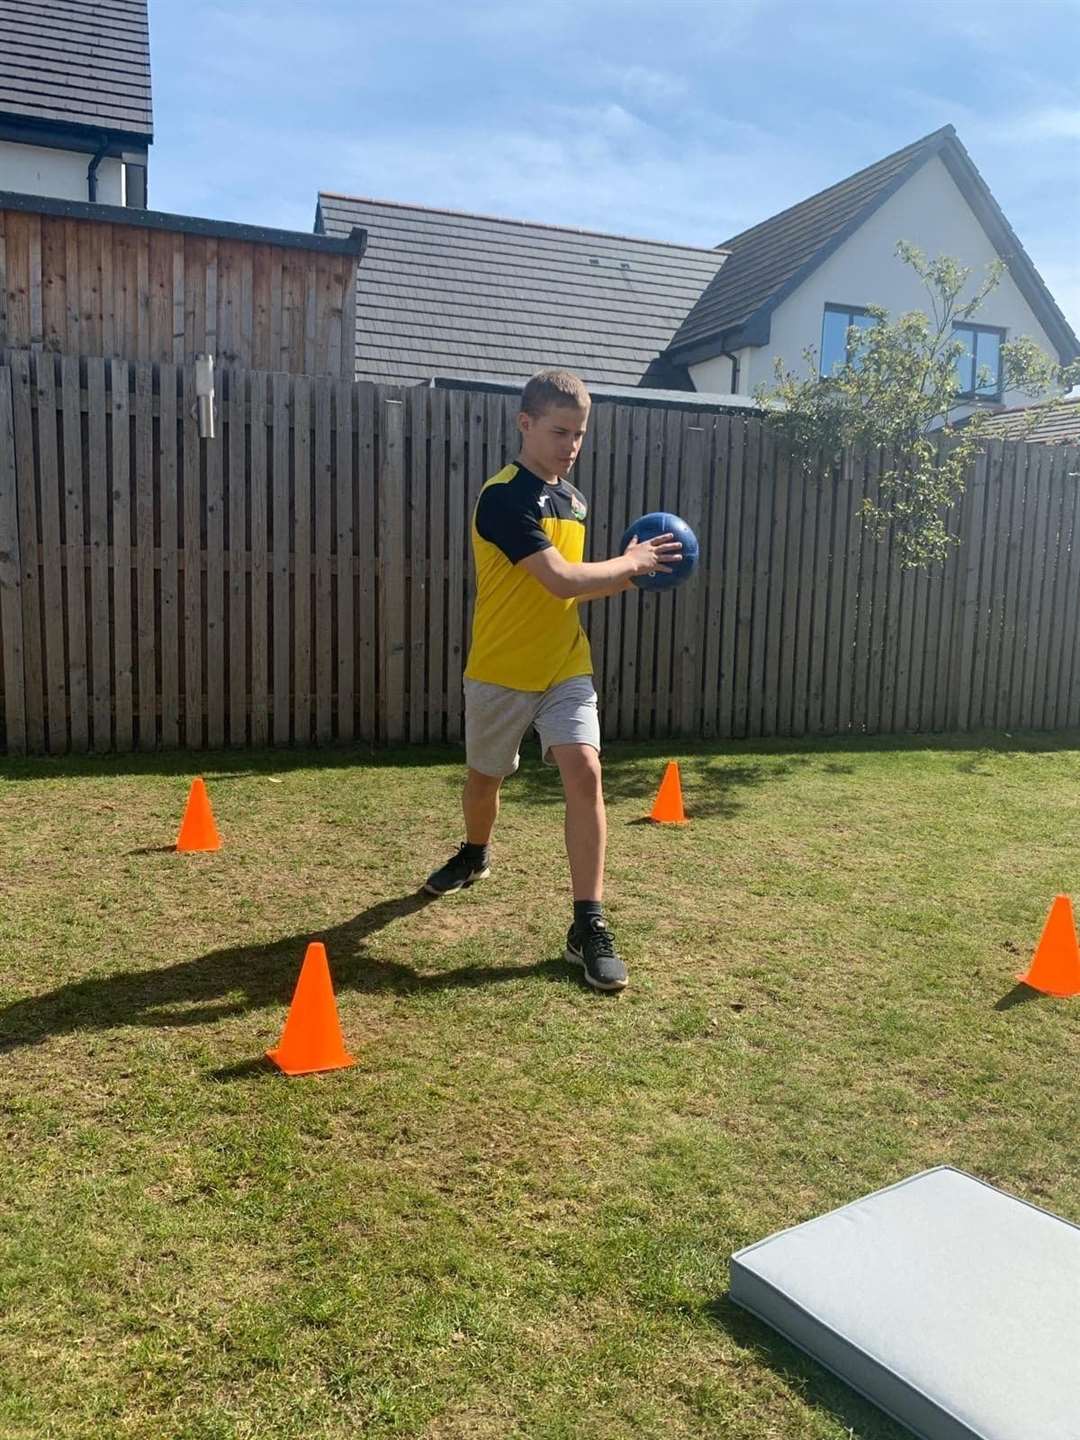 Grant Napier working out in his back garden.